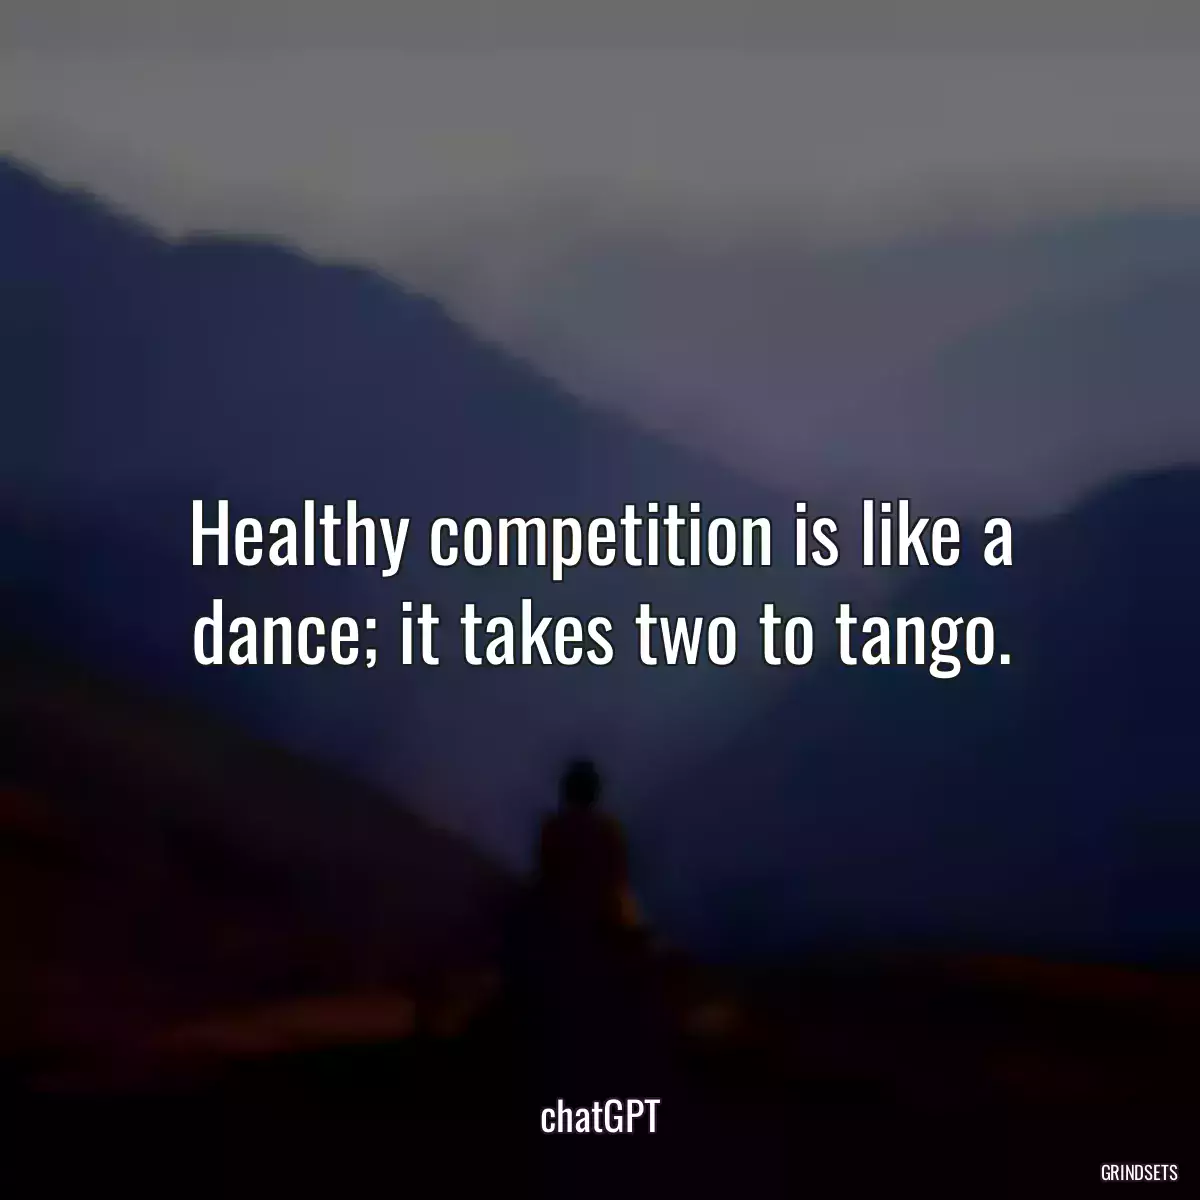 Healthy competition is like a dance; it takes two to tango.